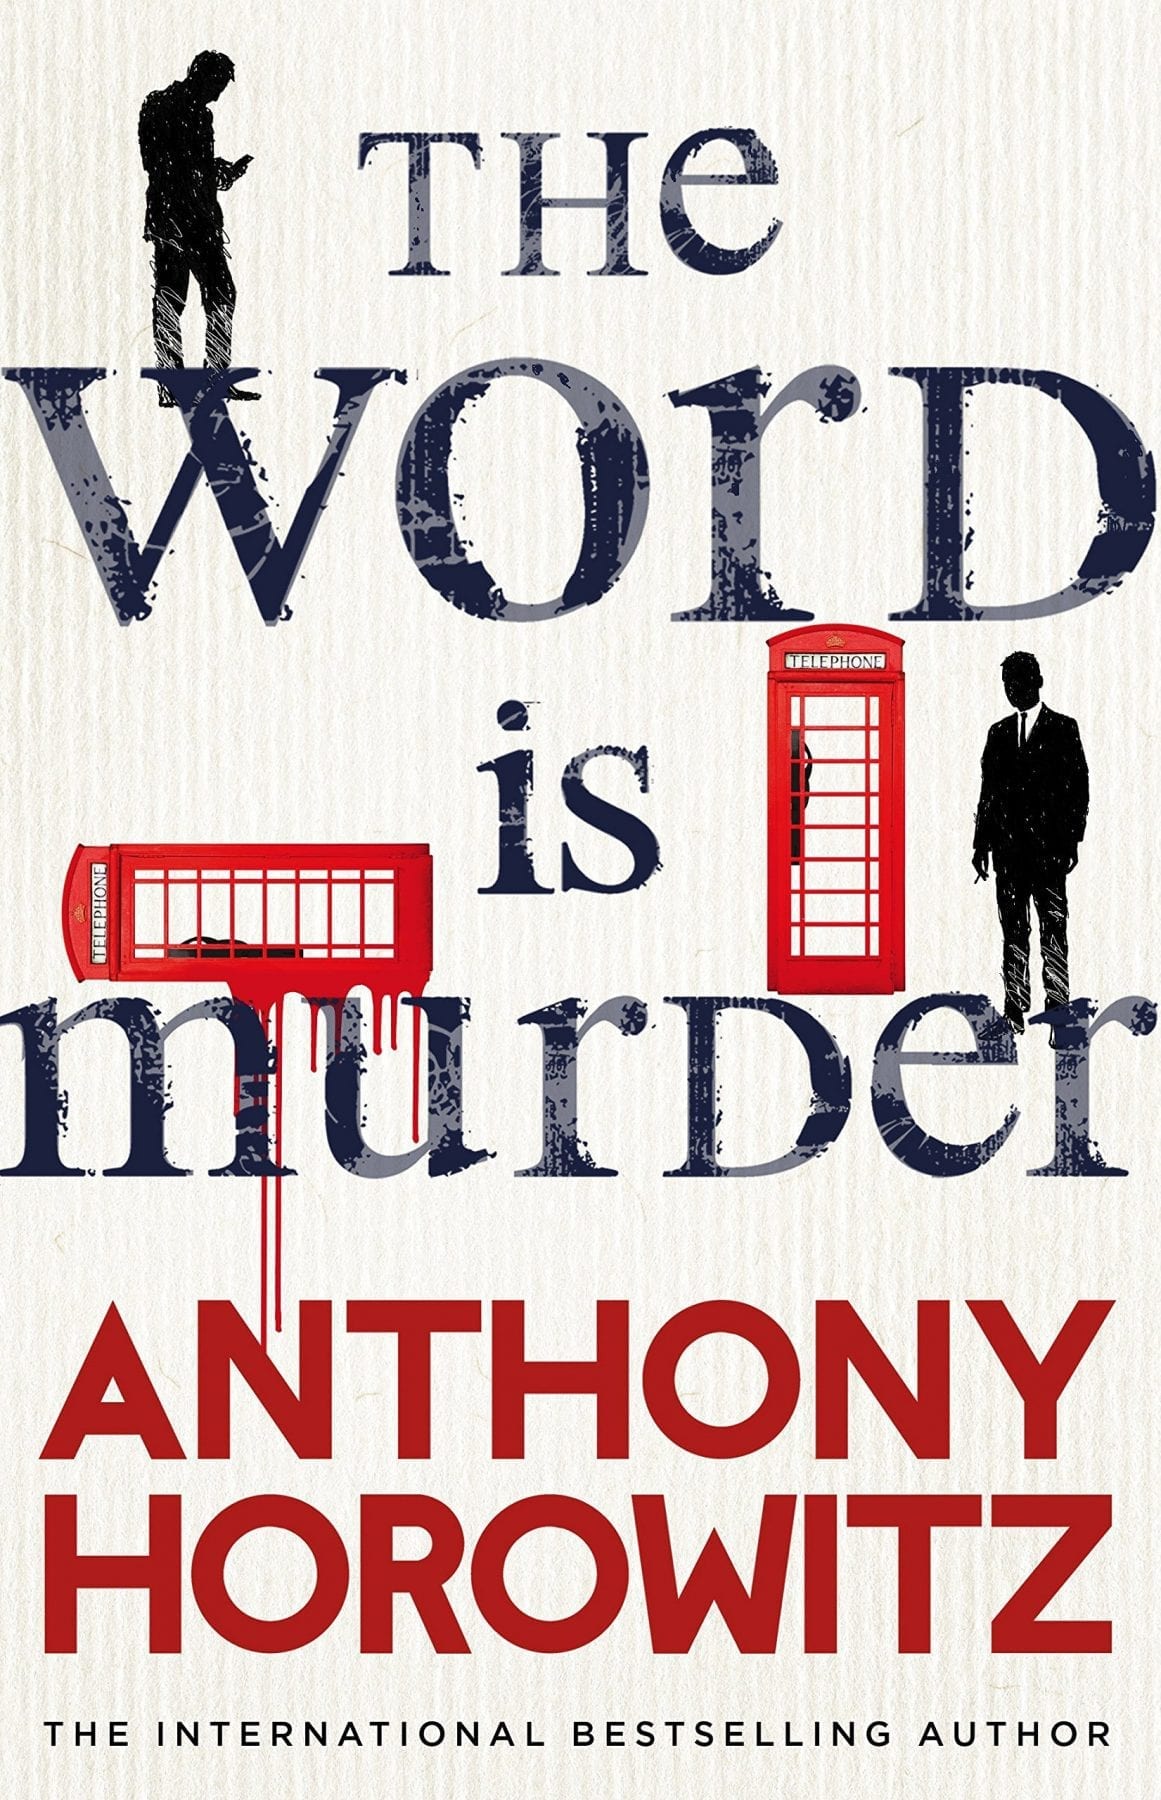 The Word Is Murder by Anthony Horowitz